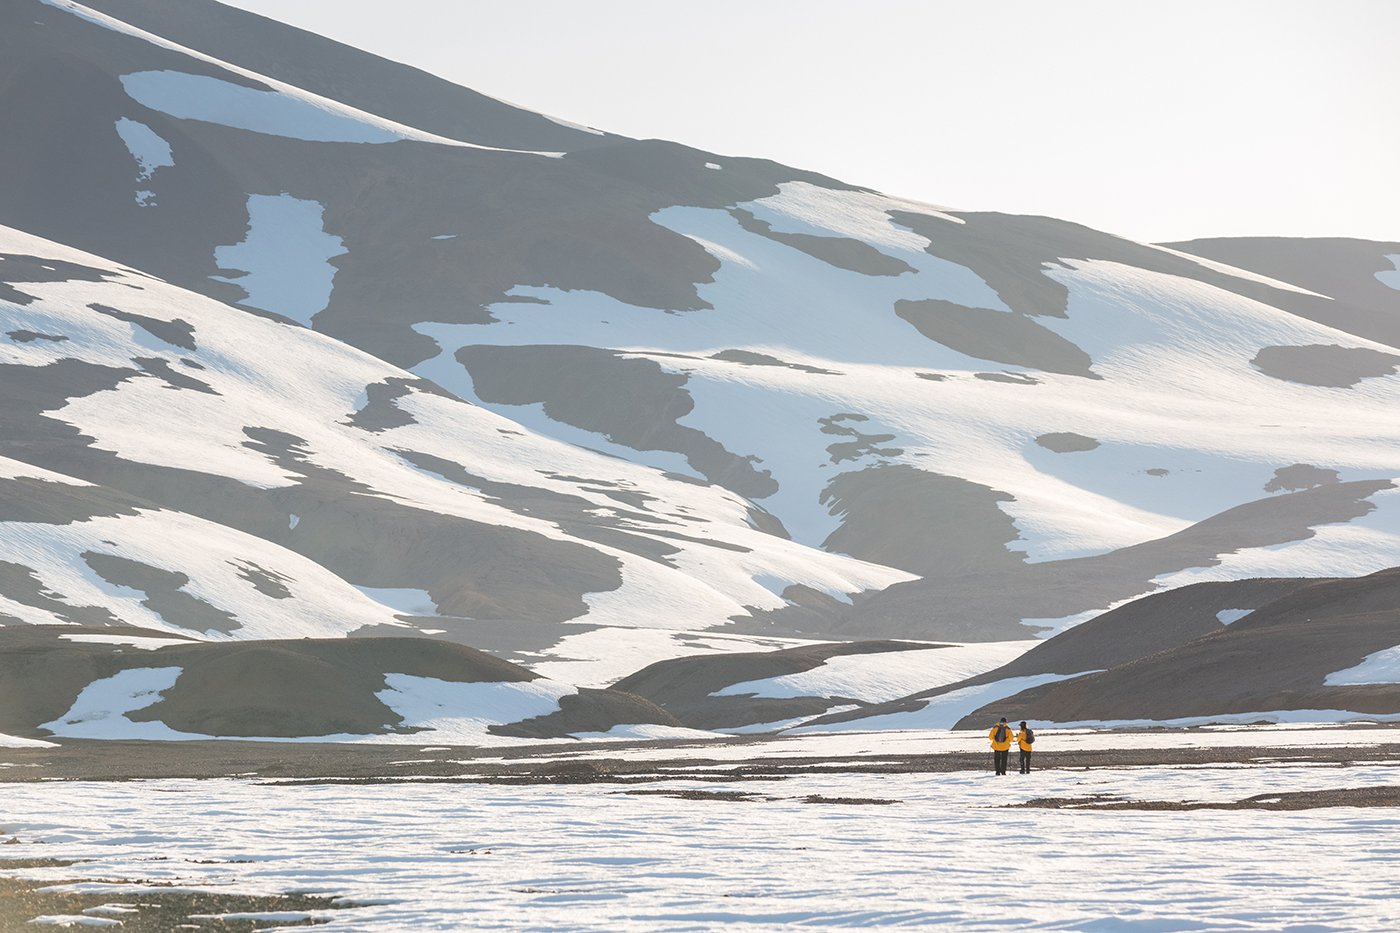 Two Quark Expeditions guests hiking in snowy East Greenland.